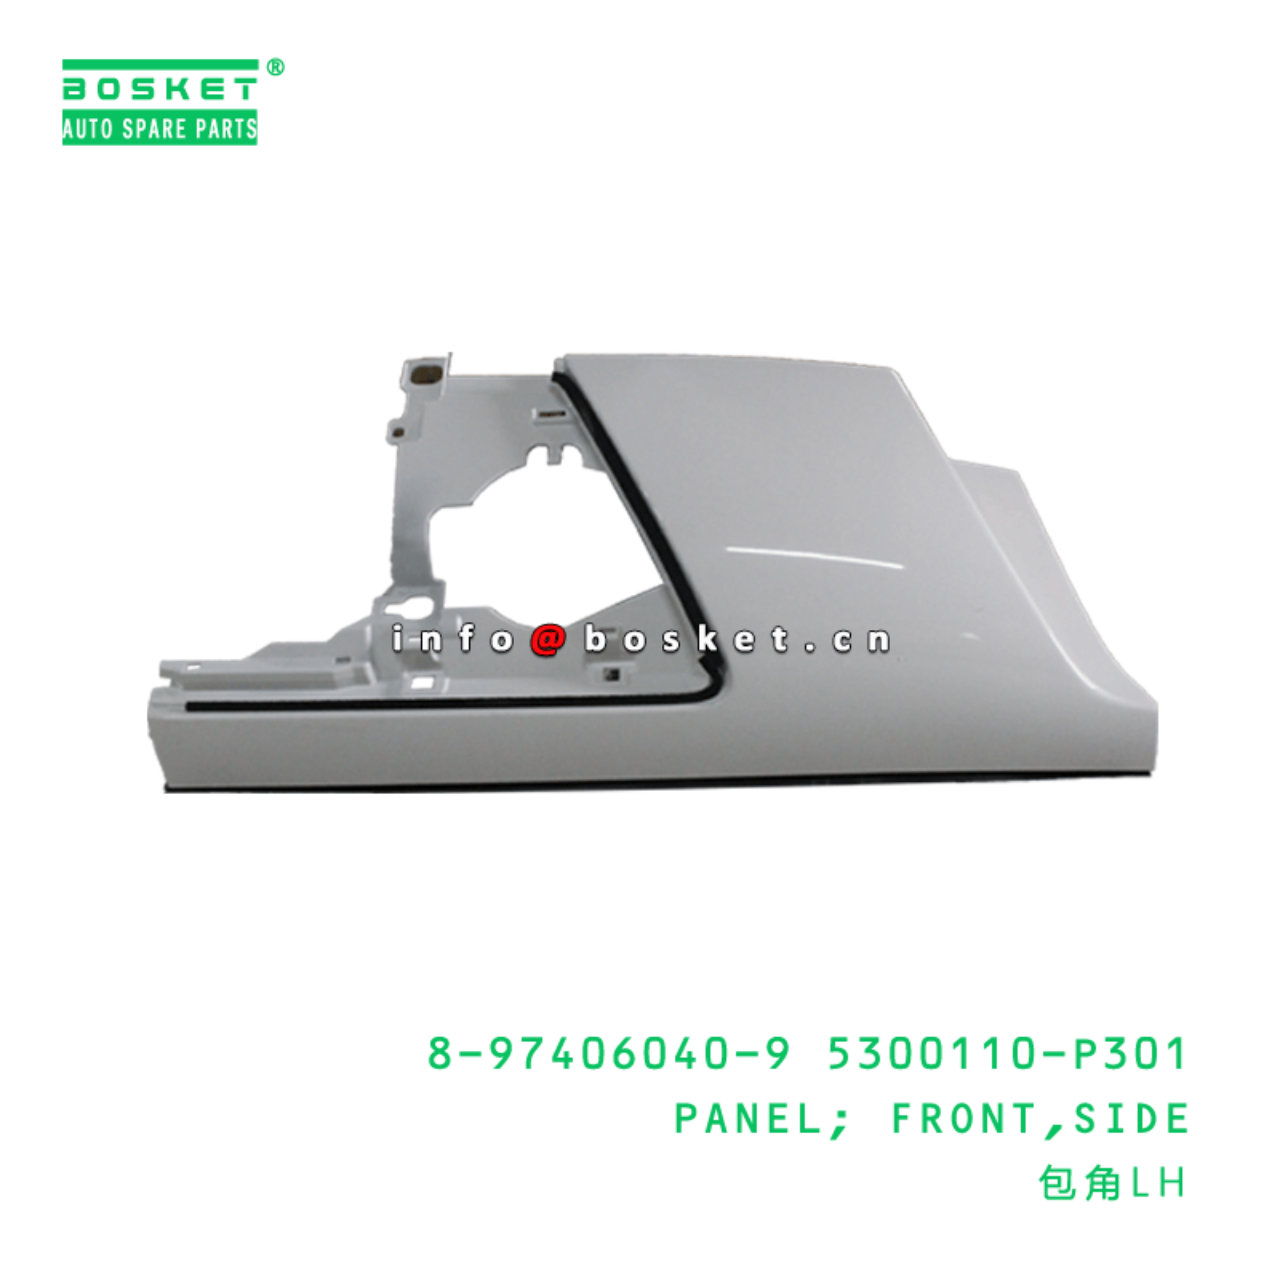 8-97406040-9 5300110-P301 Side Front Panel 8974060409 5300110P301 Suitable for ISUZU 700P